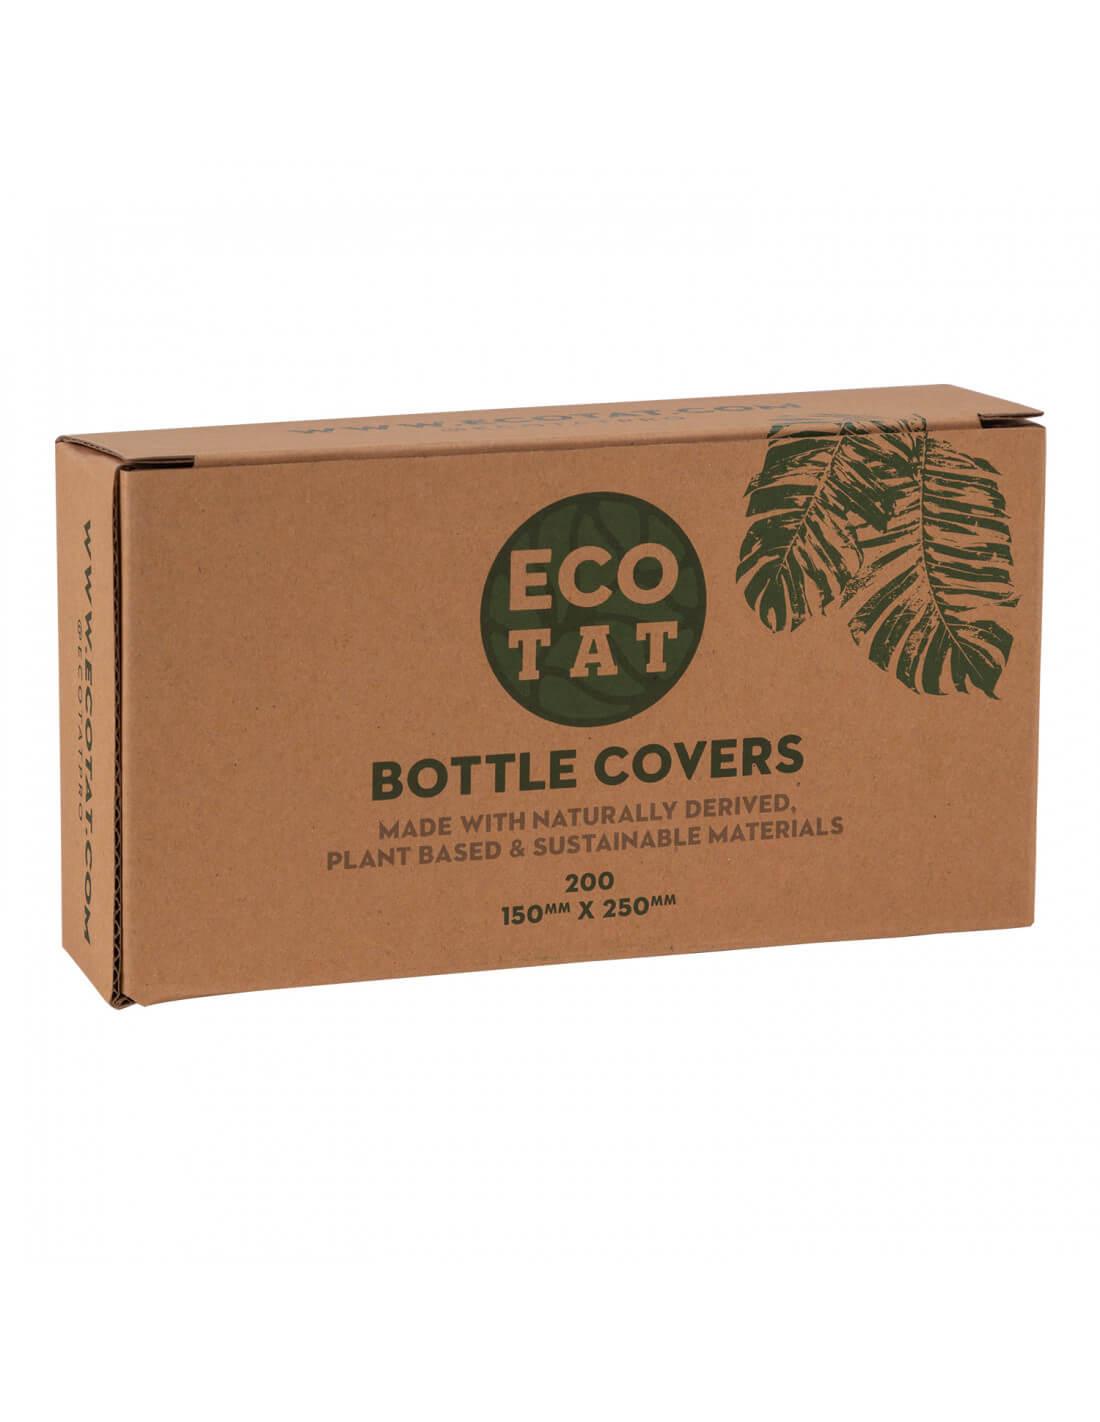 ECOTAT - Bottle Covers - 150mm x 250mm - Tattoo Everything Supplies